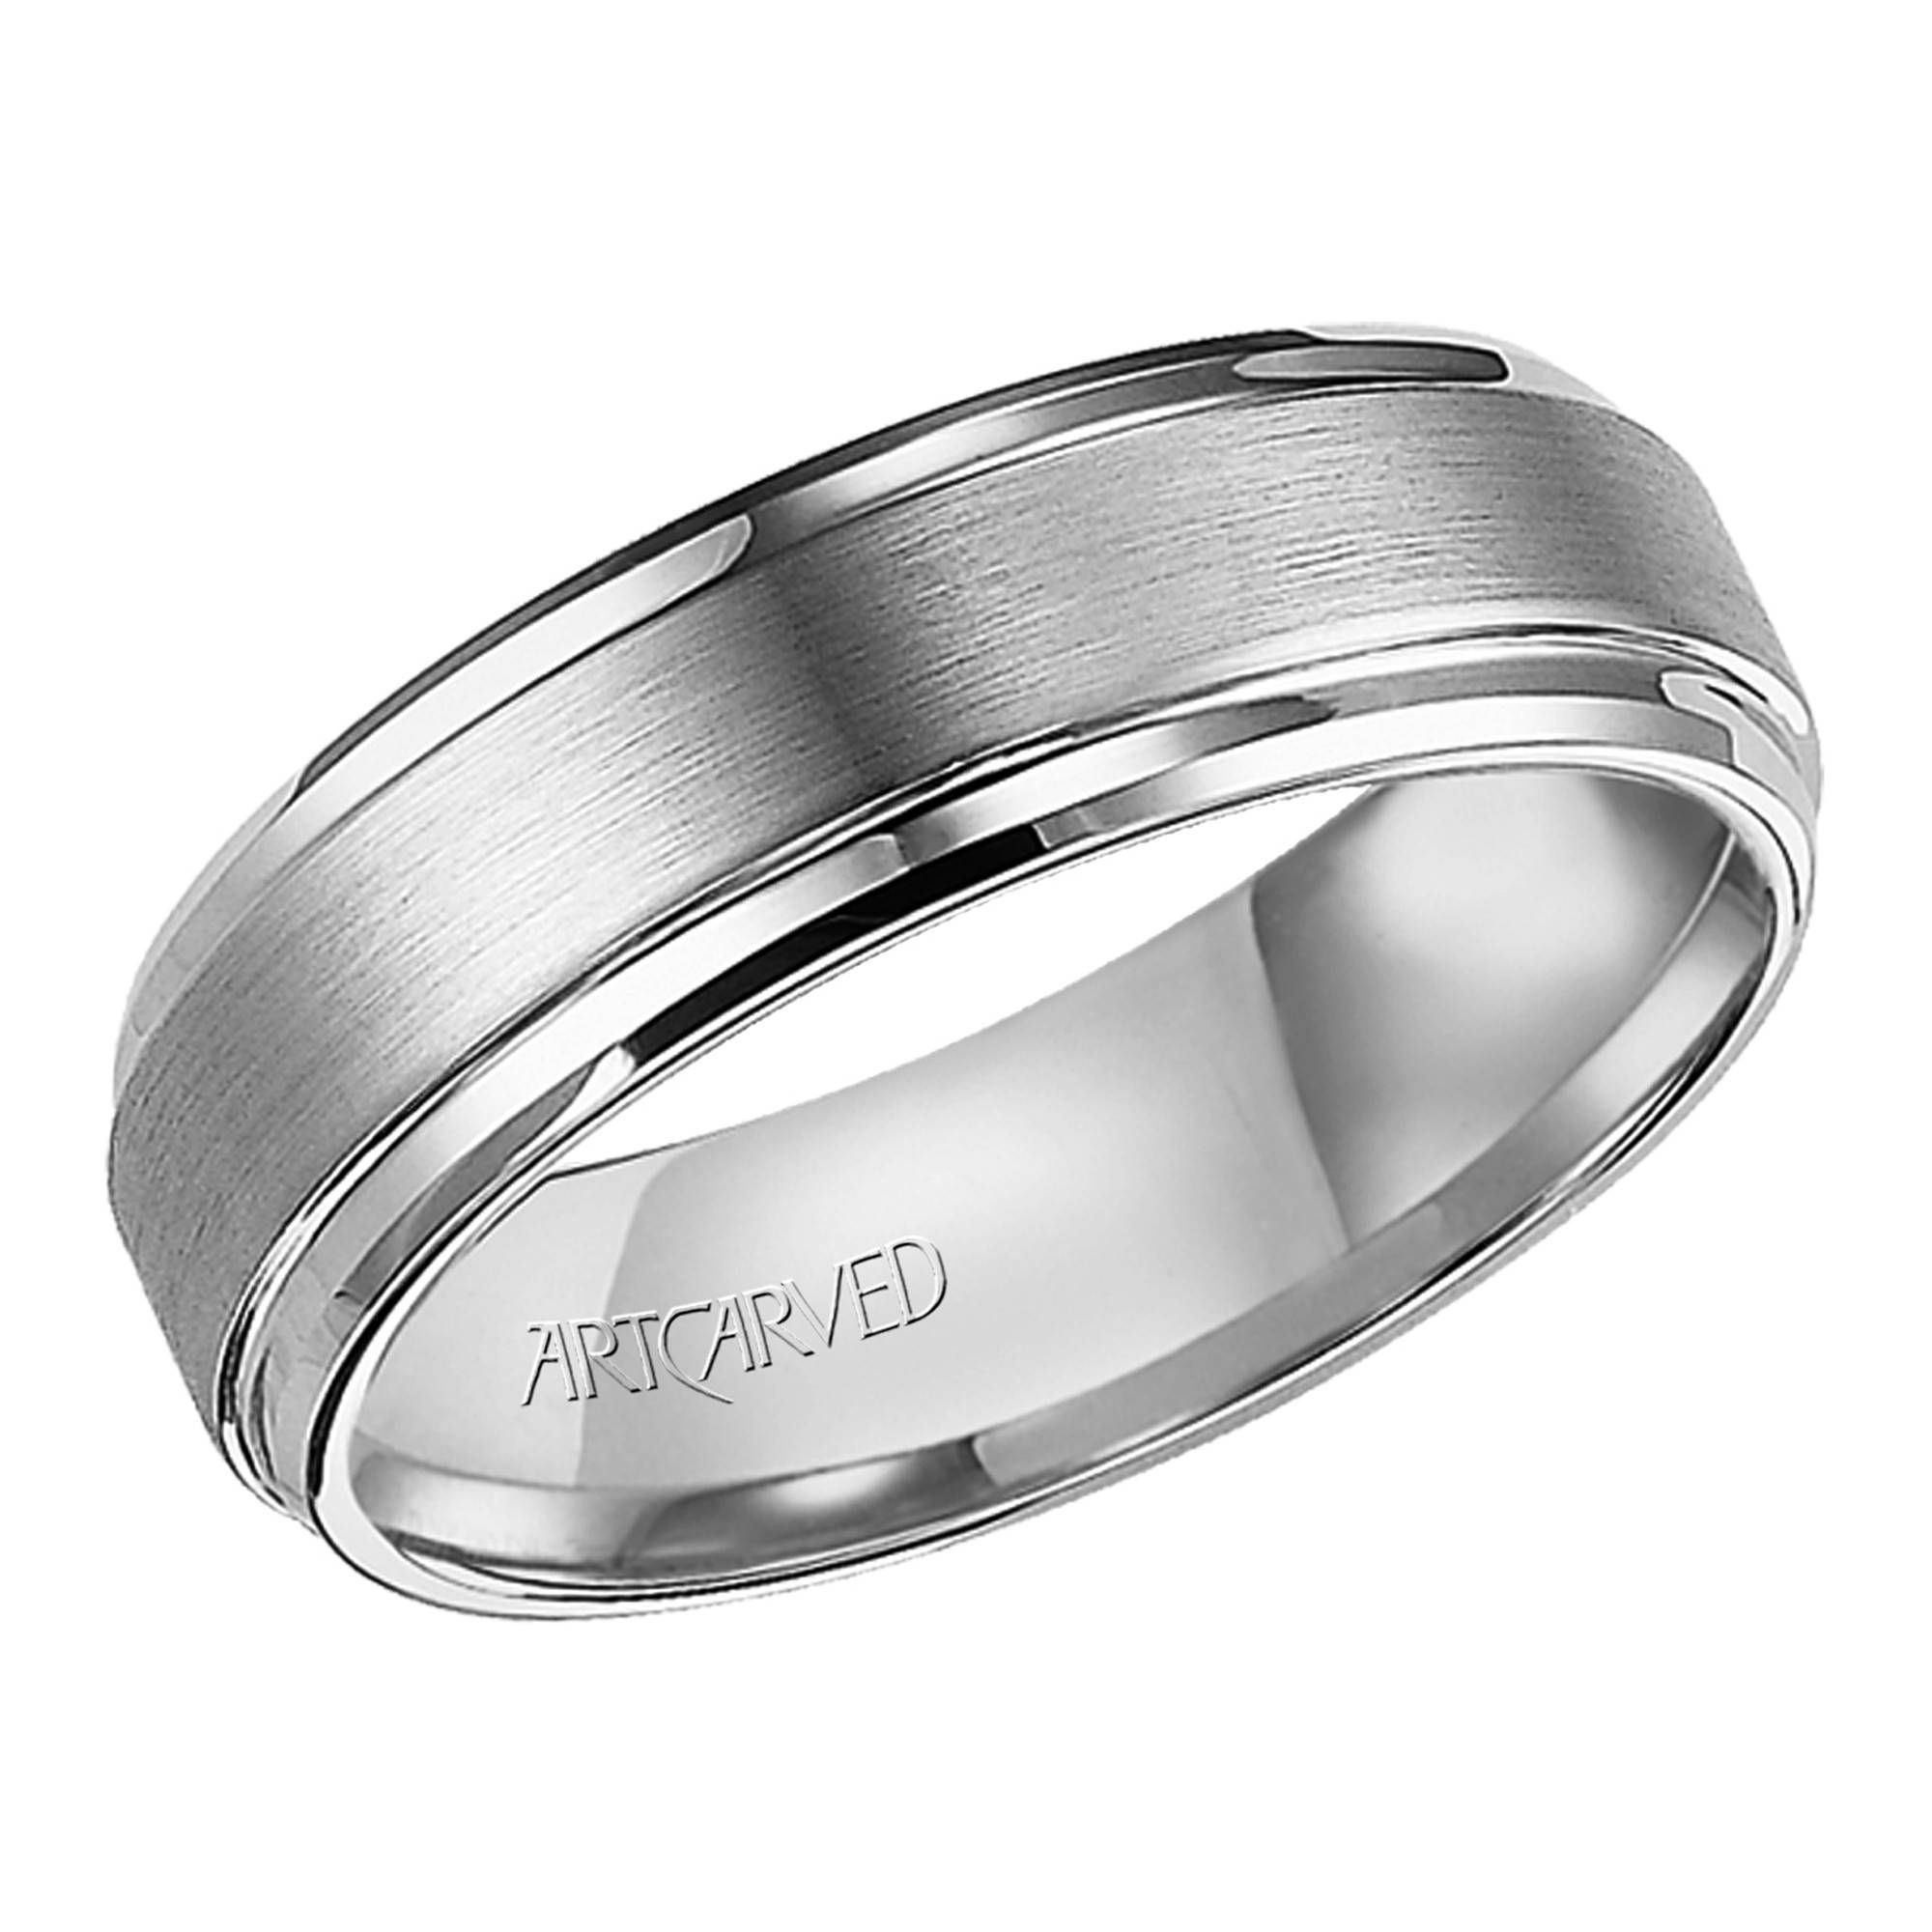 Artcarved Mens Exquisite Carved Wedding Band In Tungsten Carbide (7mm) Throughout 7mm Tungsten Wedding Bands (View 1 of 15)